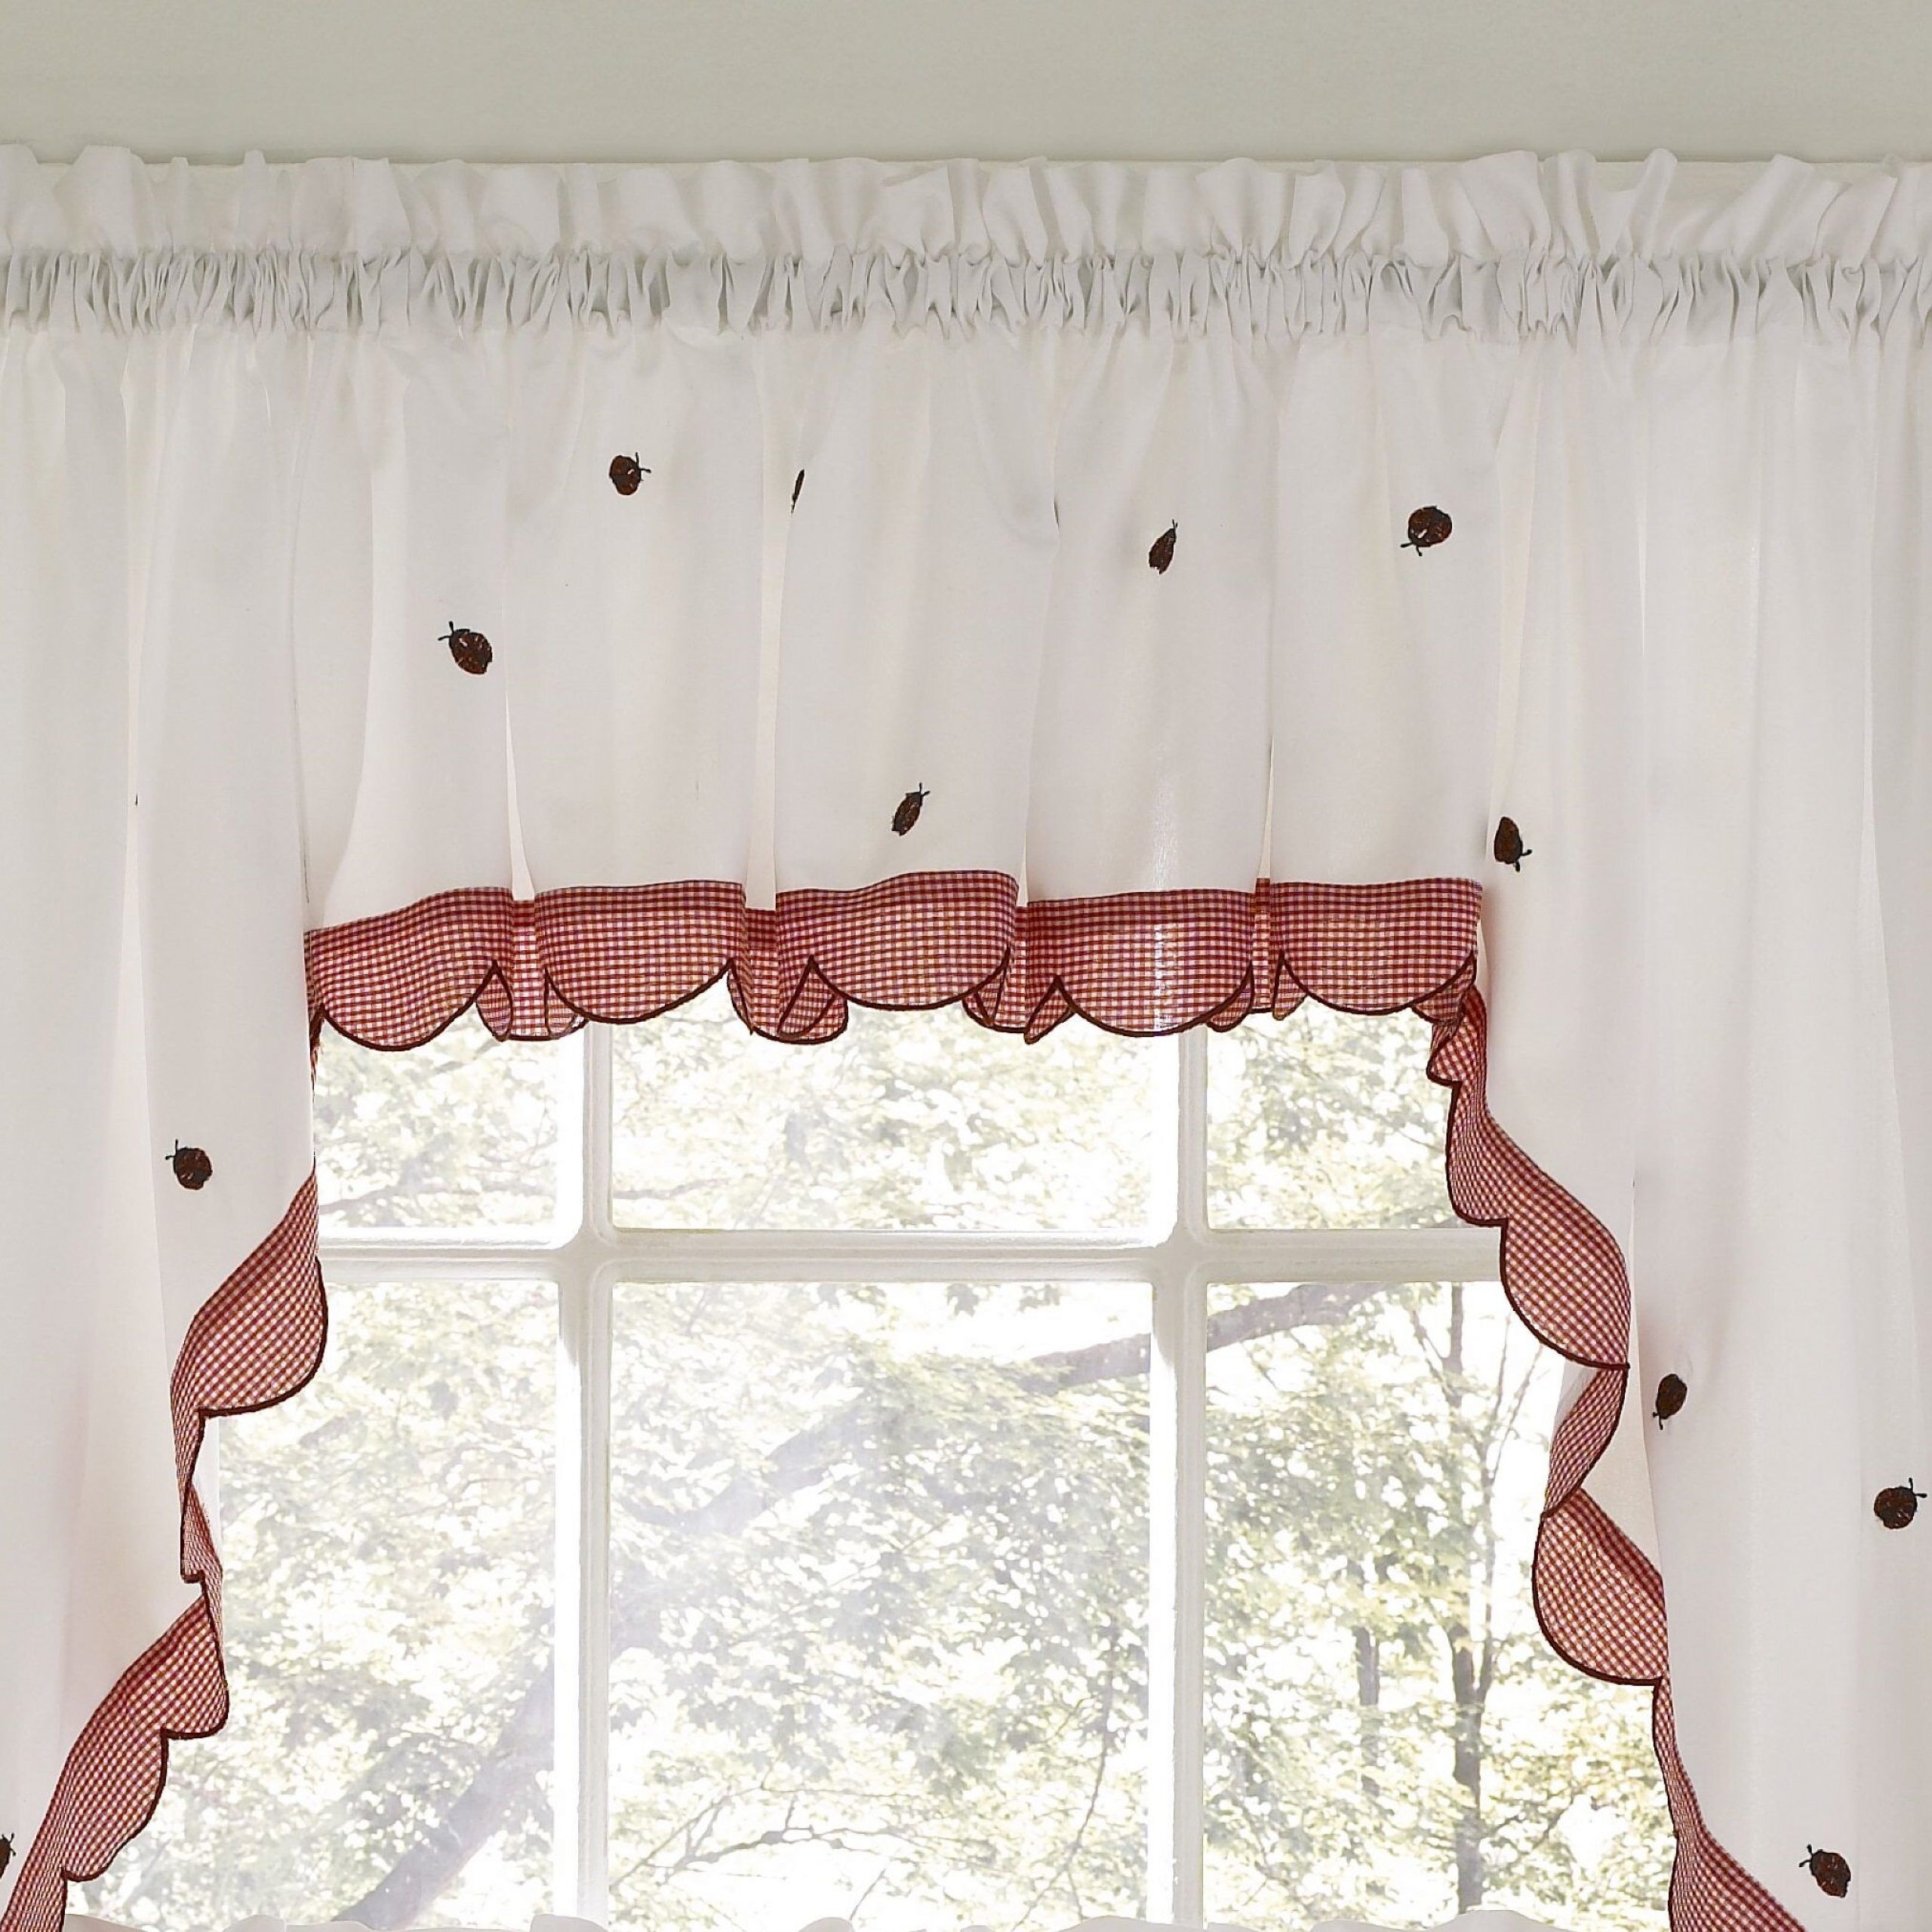 Higham Traditional Elegance 56" Window Valance Cafe Curtain Intended For Embroidered Ladybugs Window Curtain Pieces (View 9 of 20)